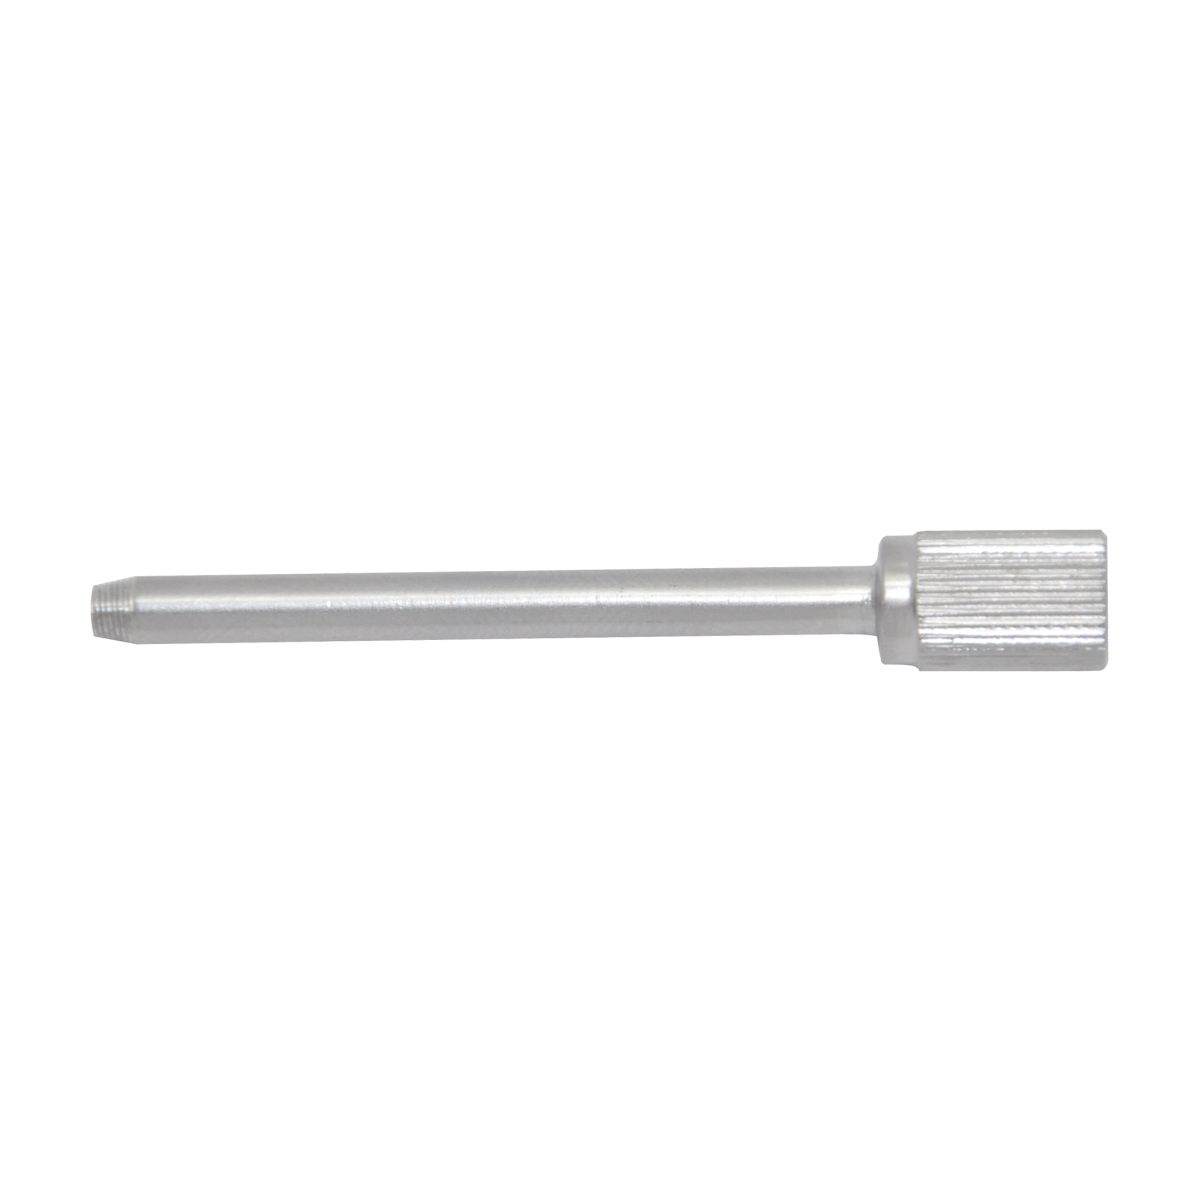 LCP-Drill-Sleeve-3.5mm-for-2.8mm-Drill-Bit-.png